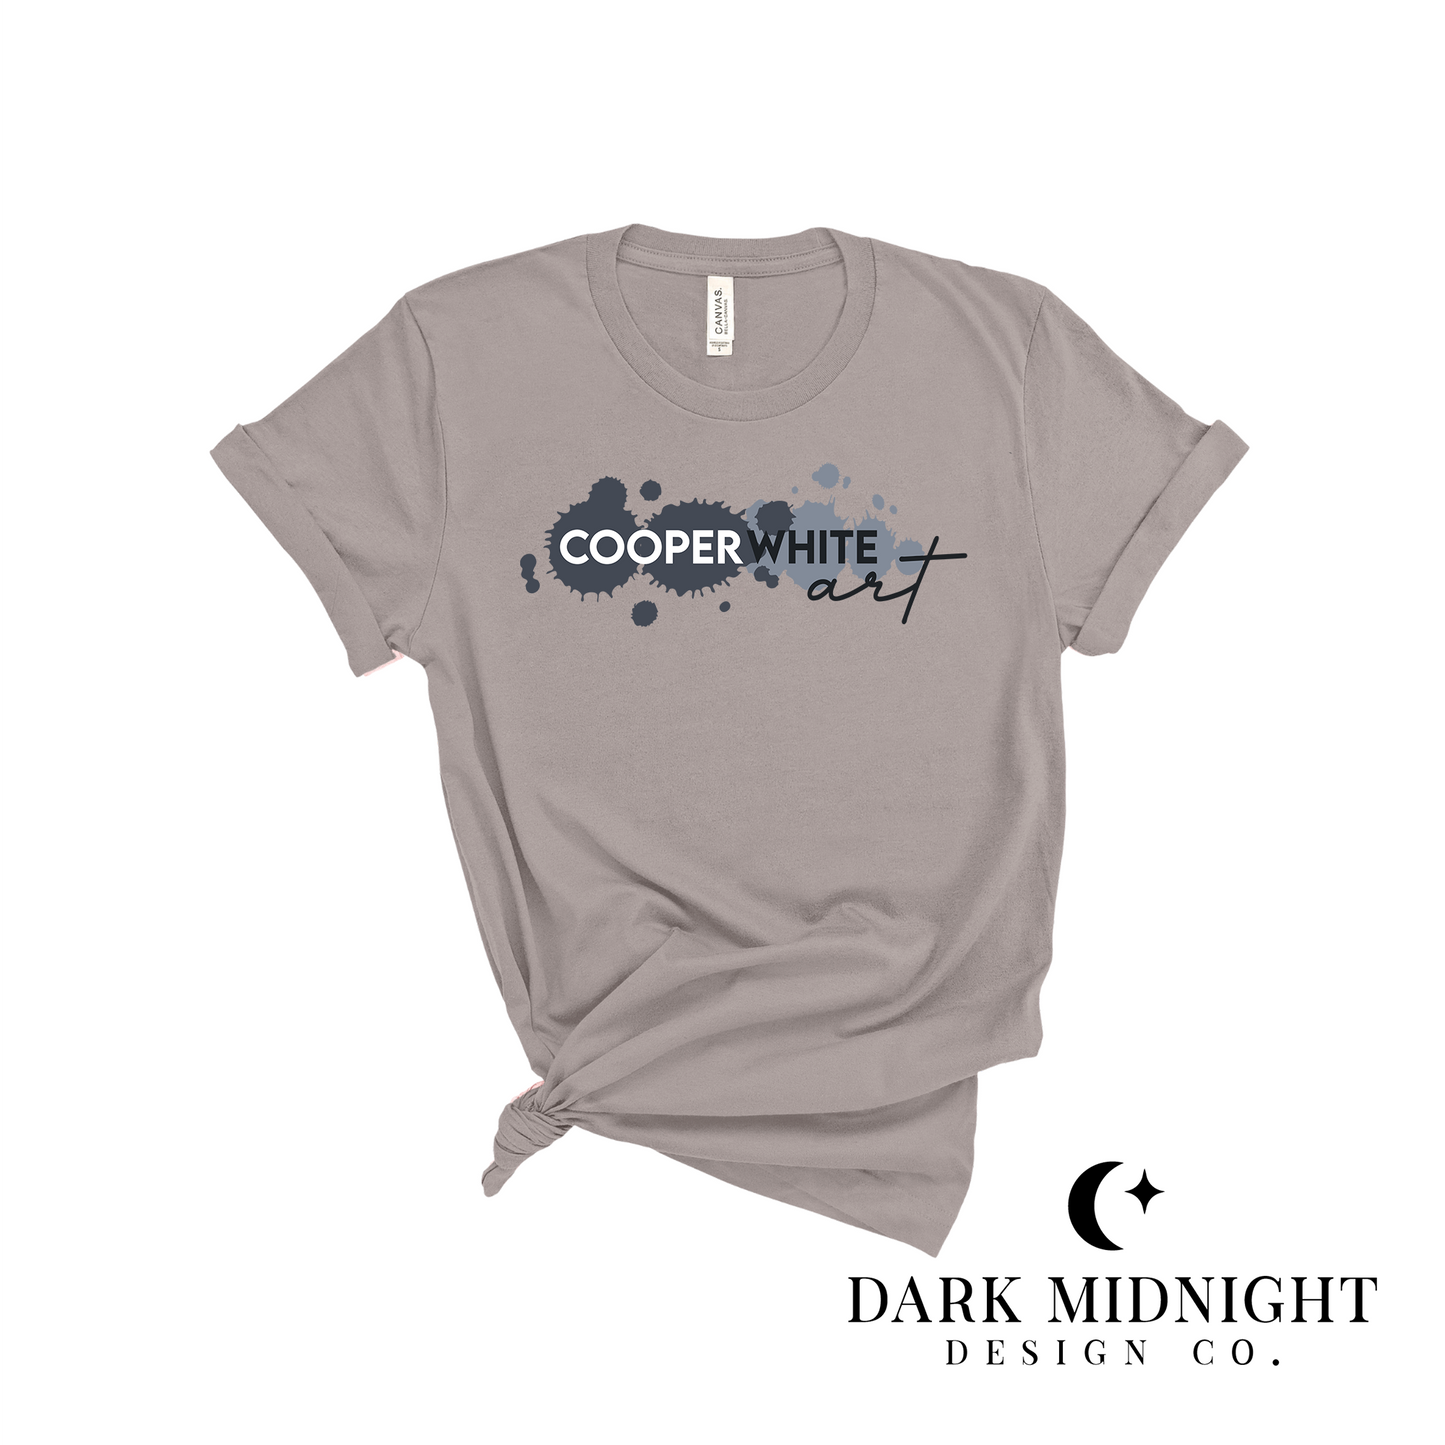 Cooper White Art Tee - Officially Licensed Greatest Love Series